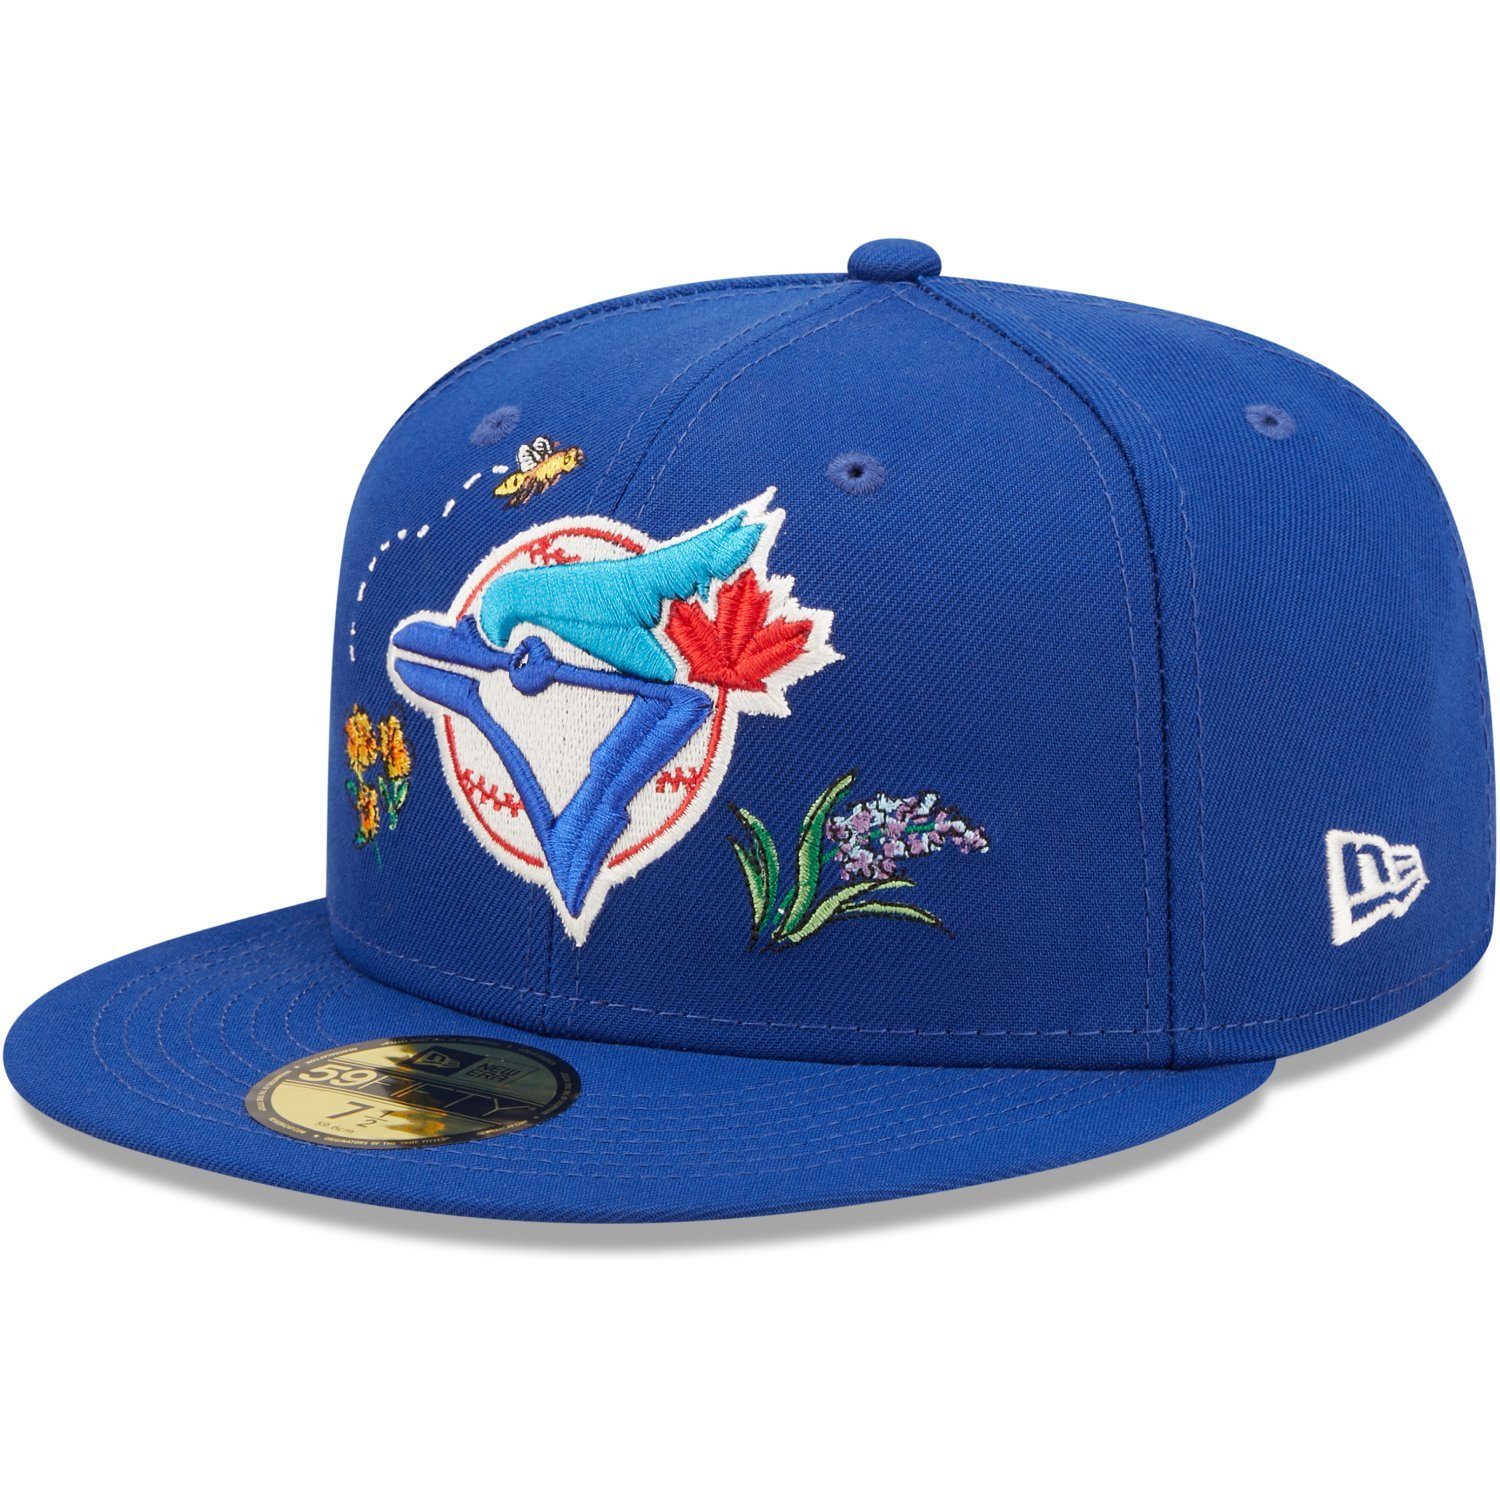 New Era Fitted Cap 59Fifty WATER FLORAL Toronto Jays blau